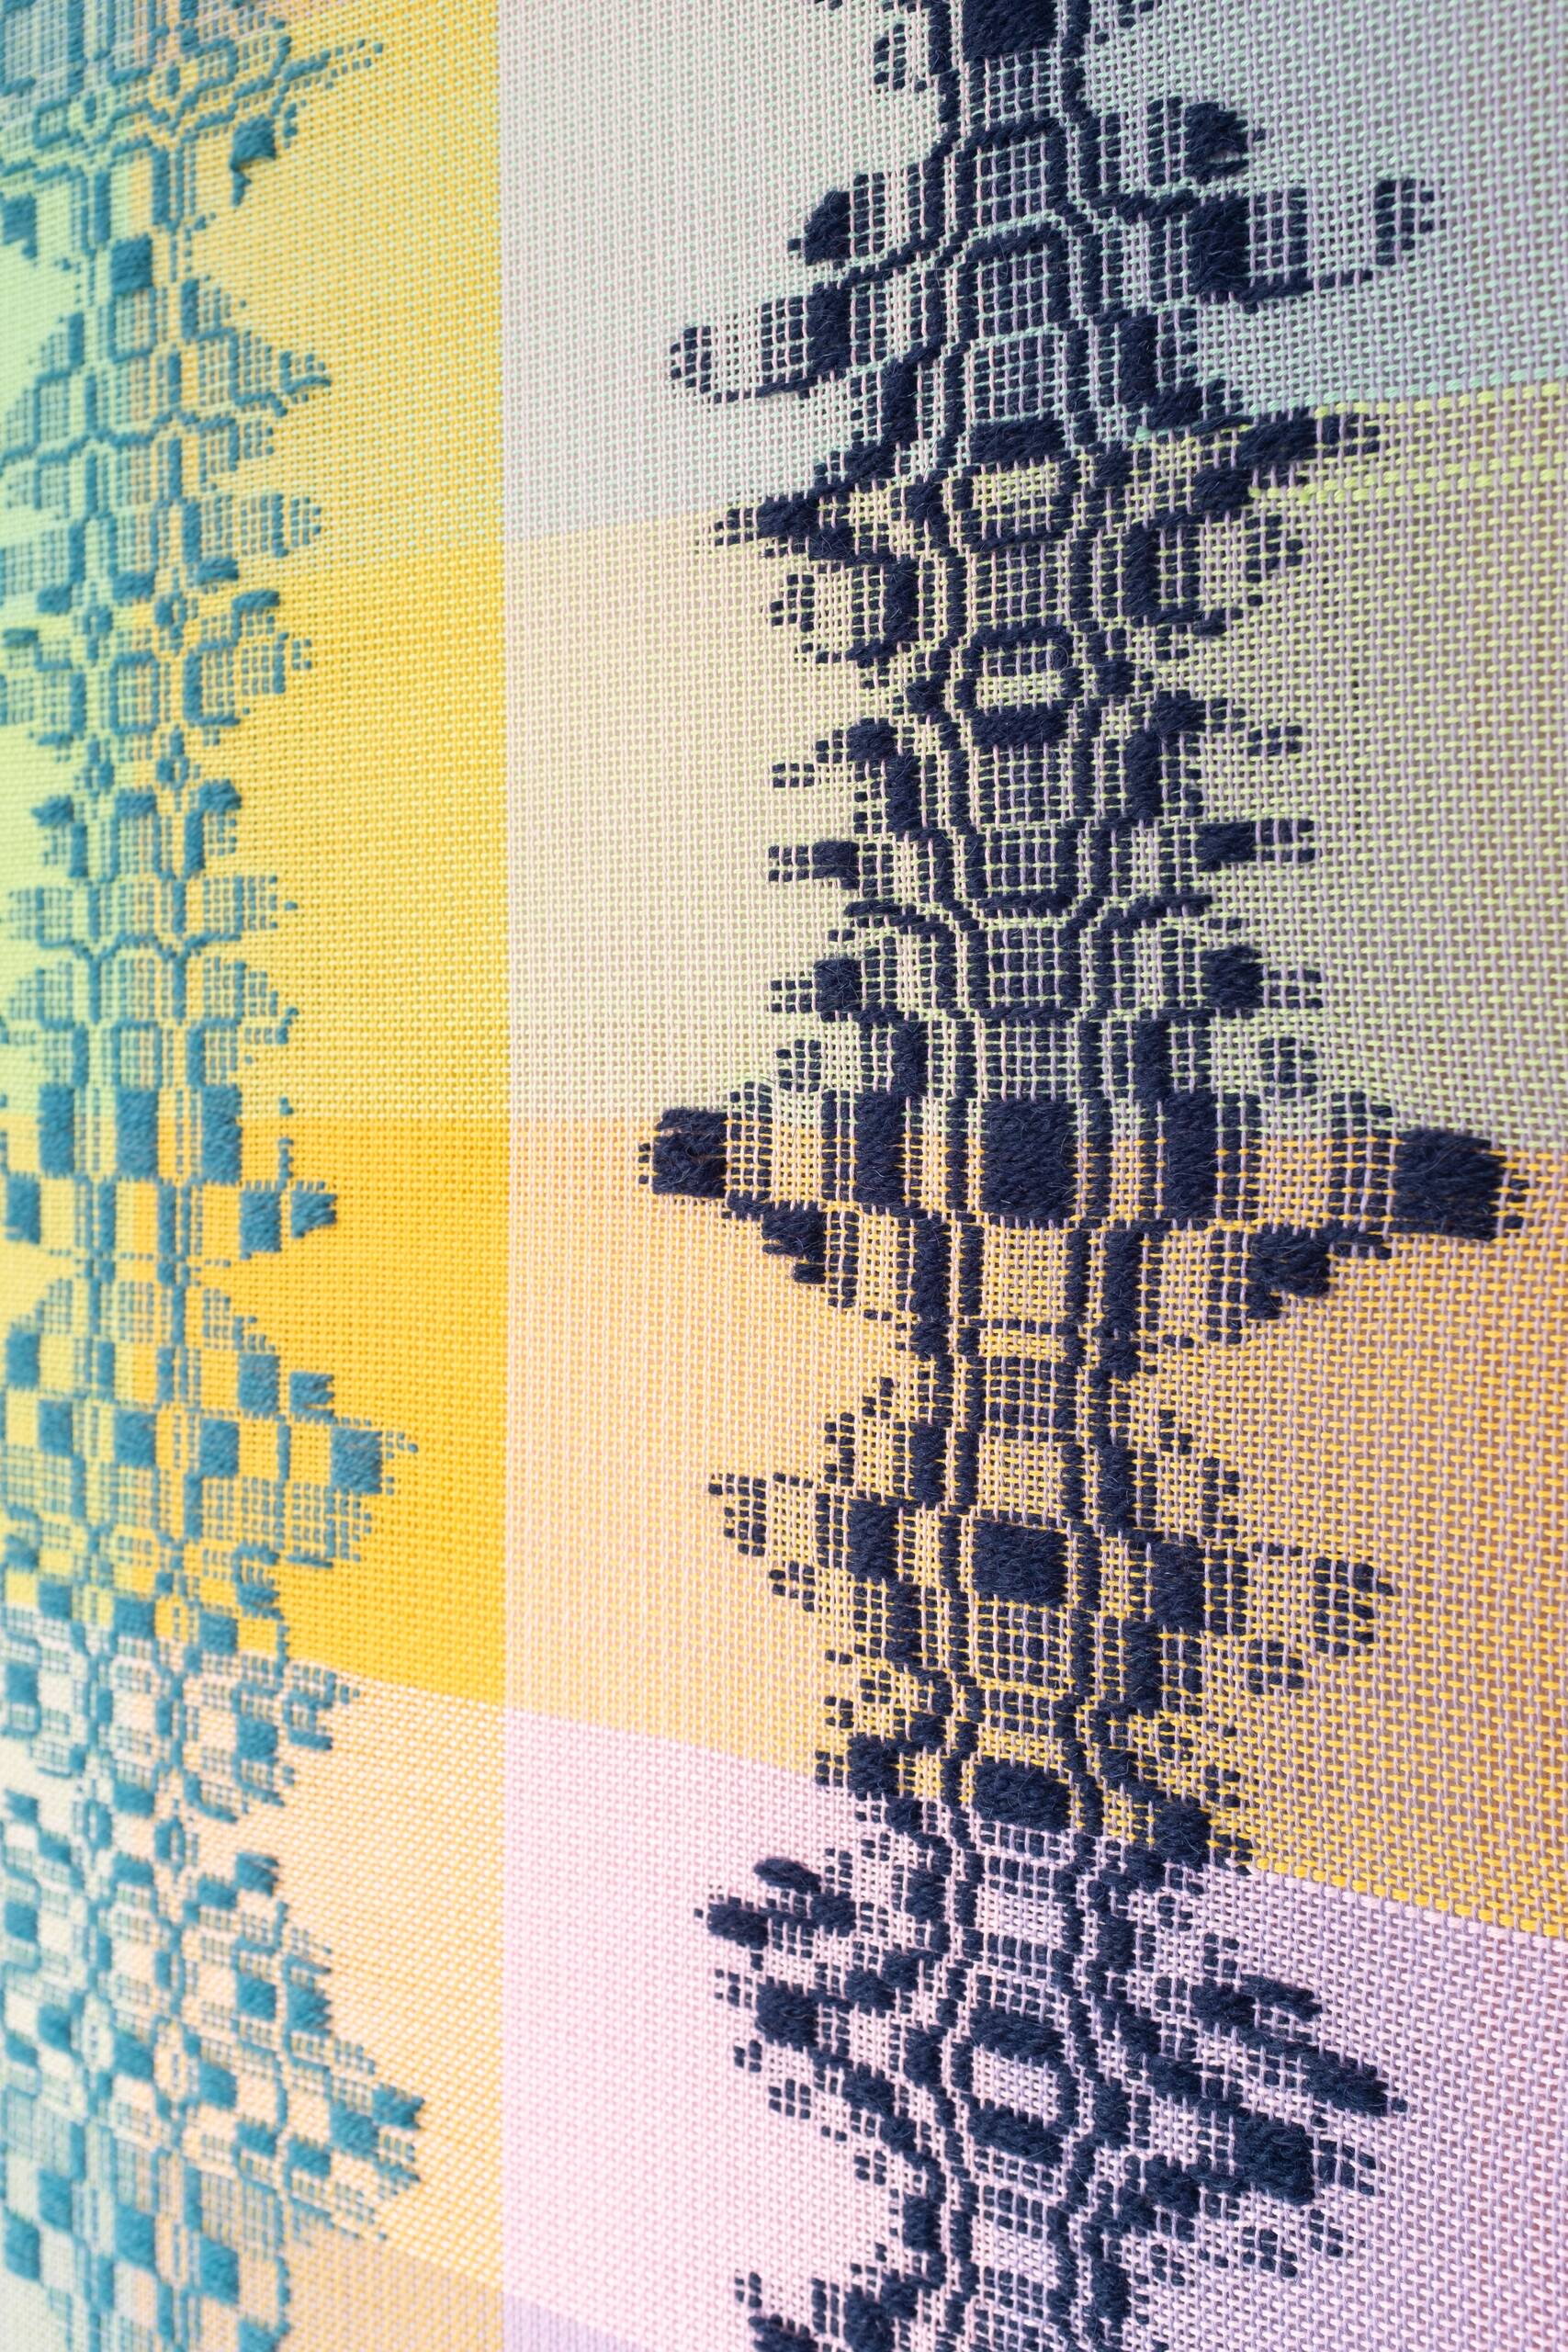 Three beings [peach-teal-navy on pastel ground], Hand-woven cotton and wool yarn, 2022